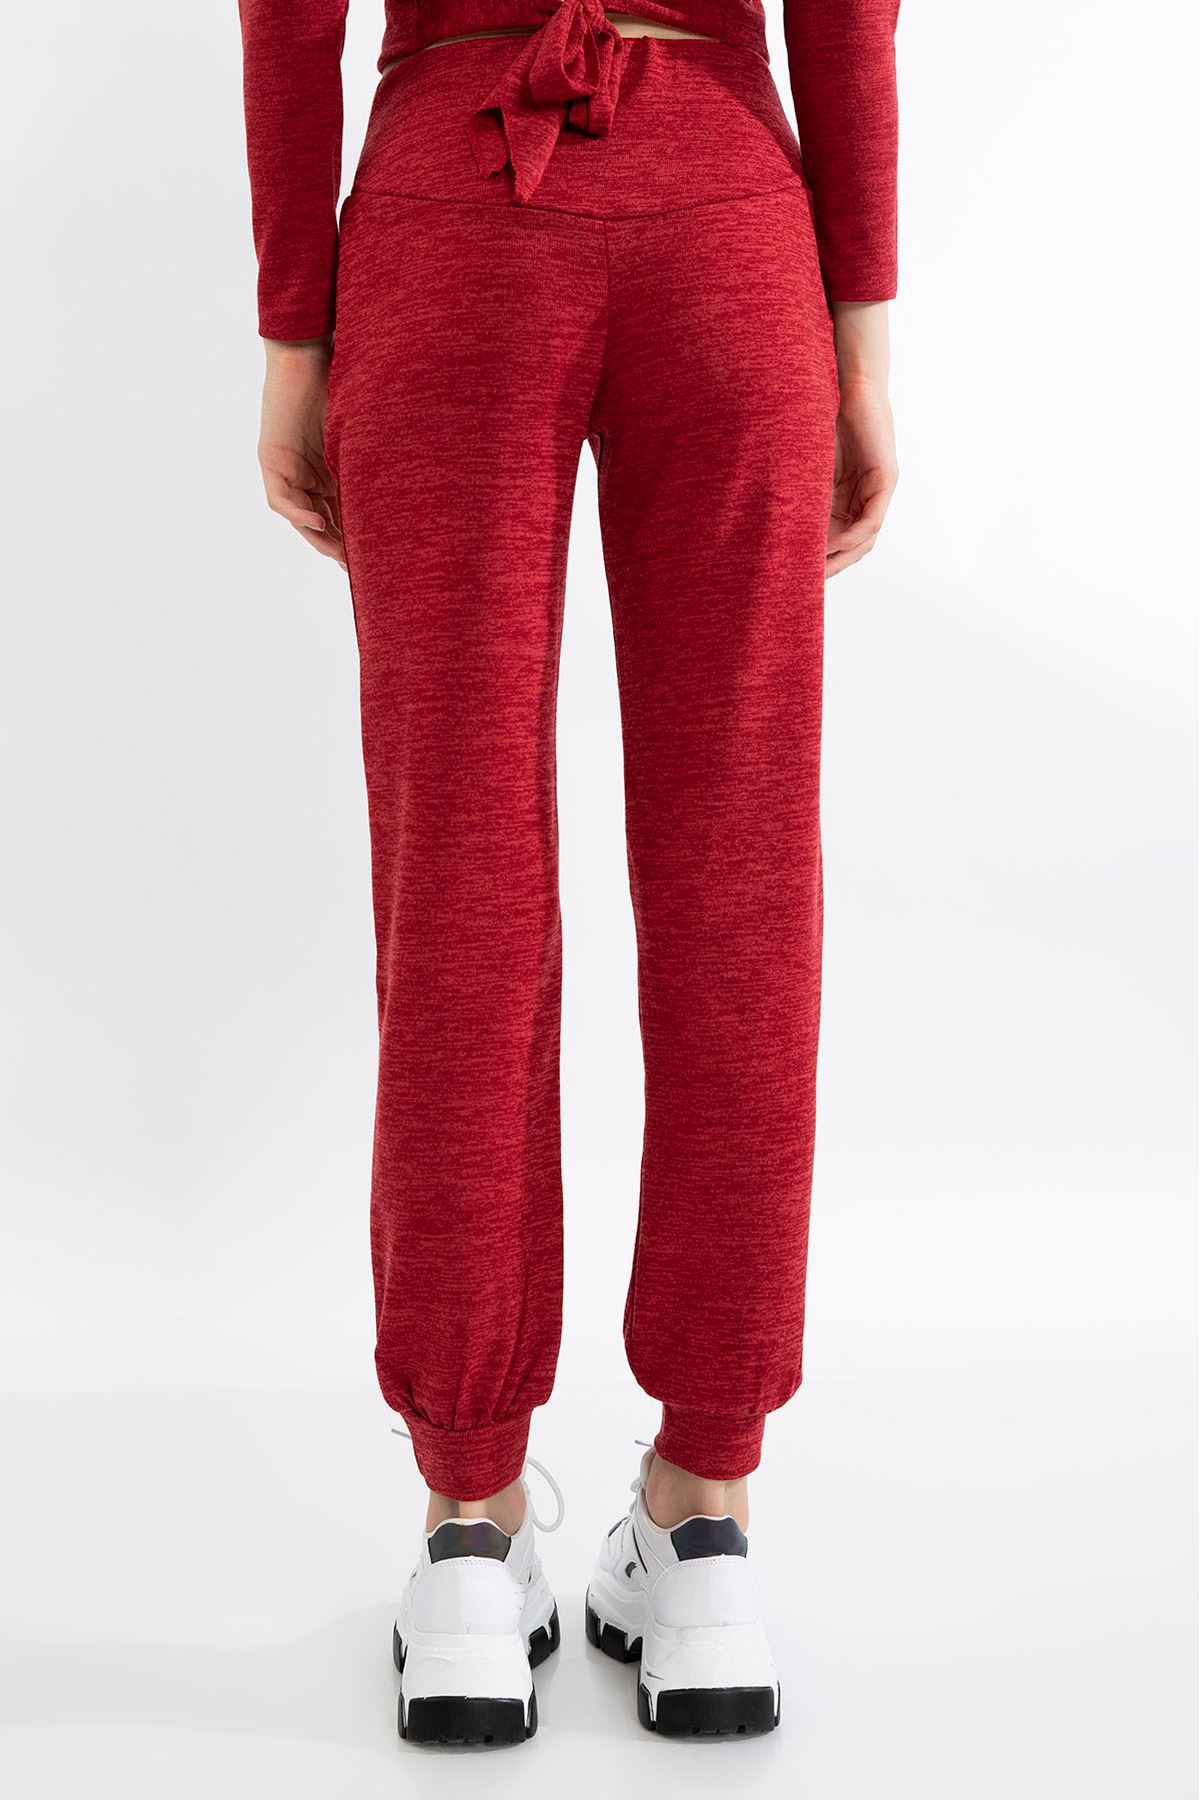 Melange Fabric Long Comfy Fit Gray Women'S Trouser - Red